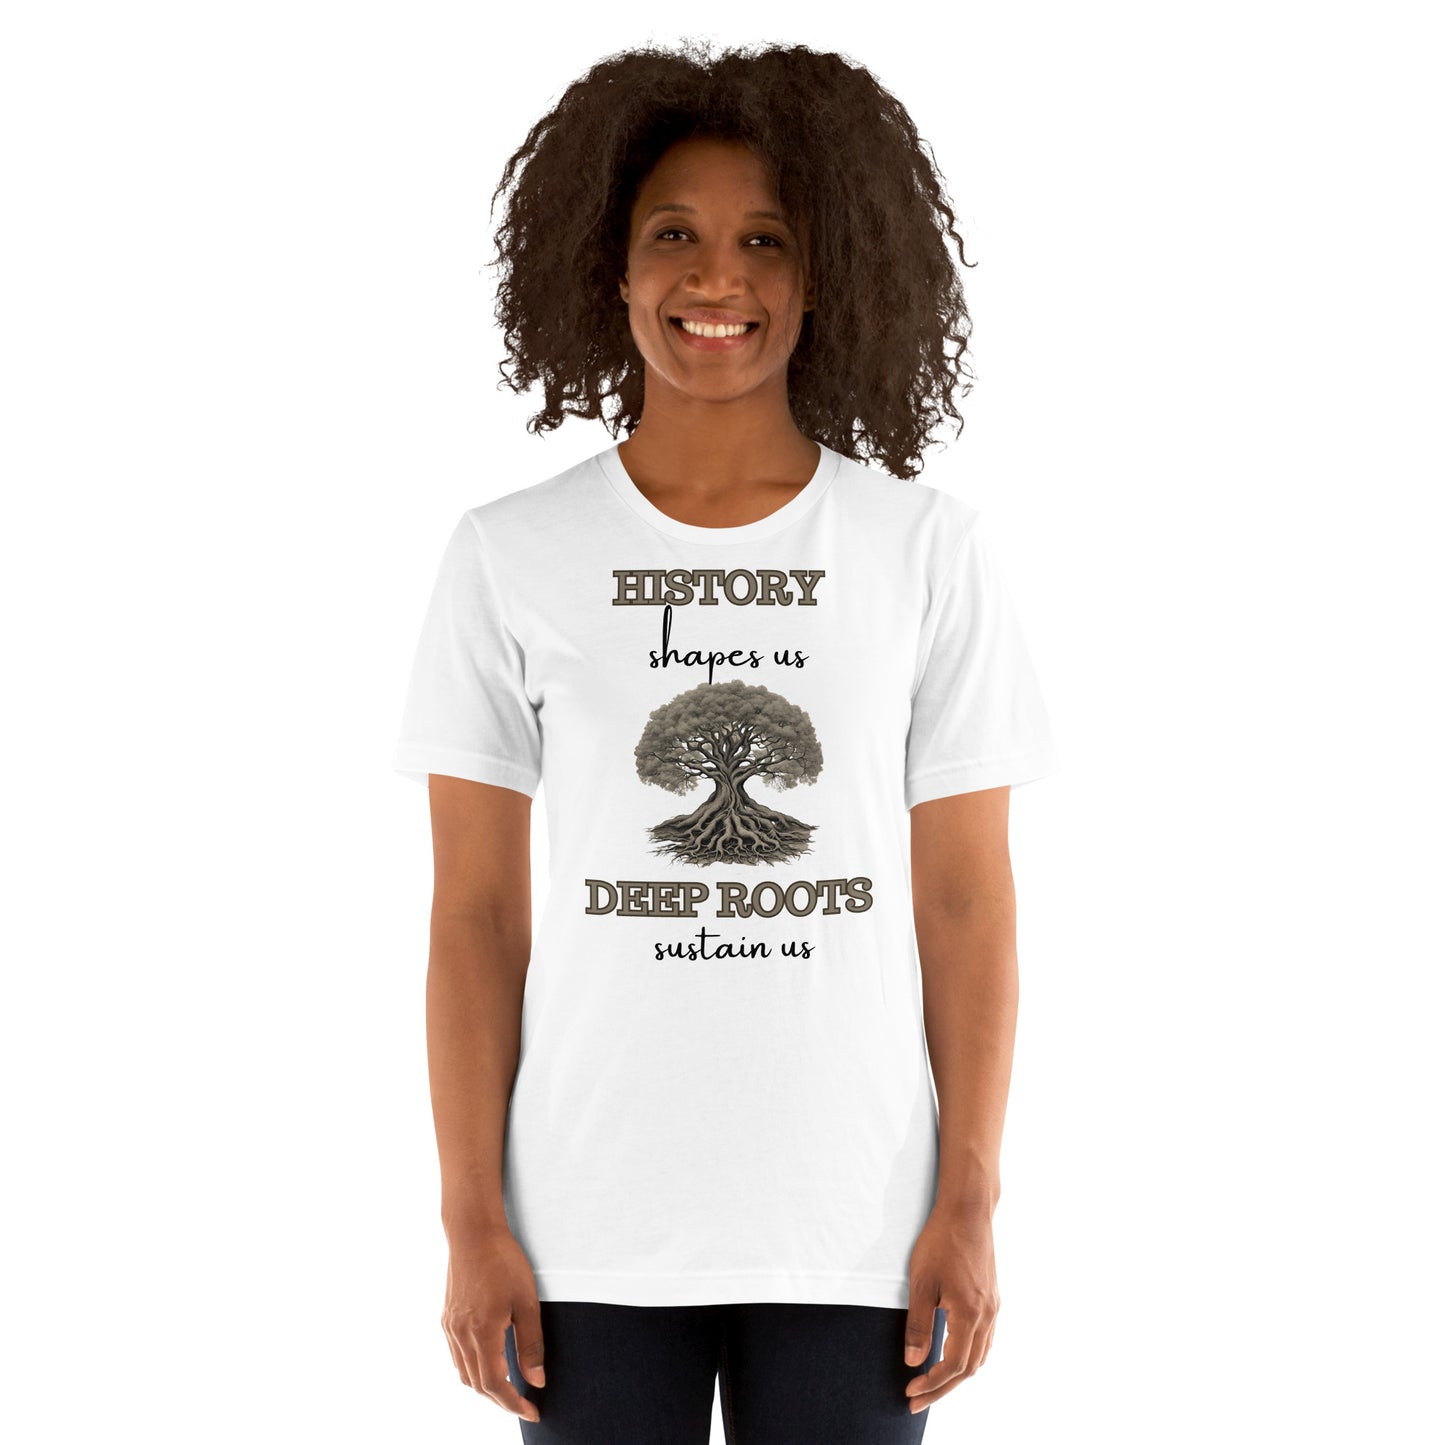 "Deeply Rooted" History T-Shirt